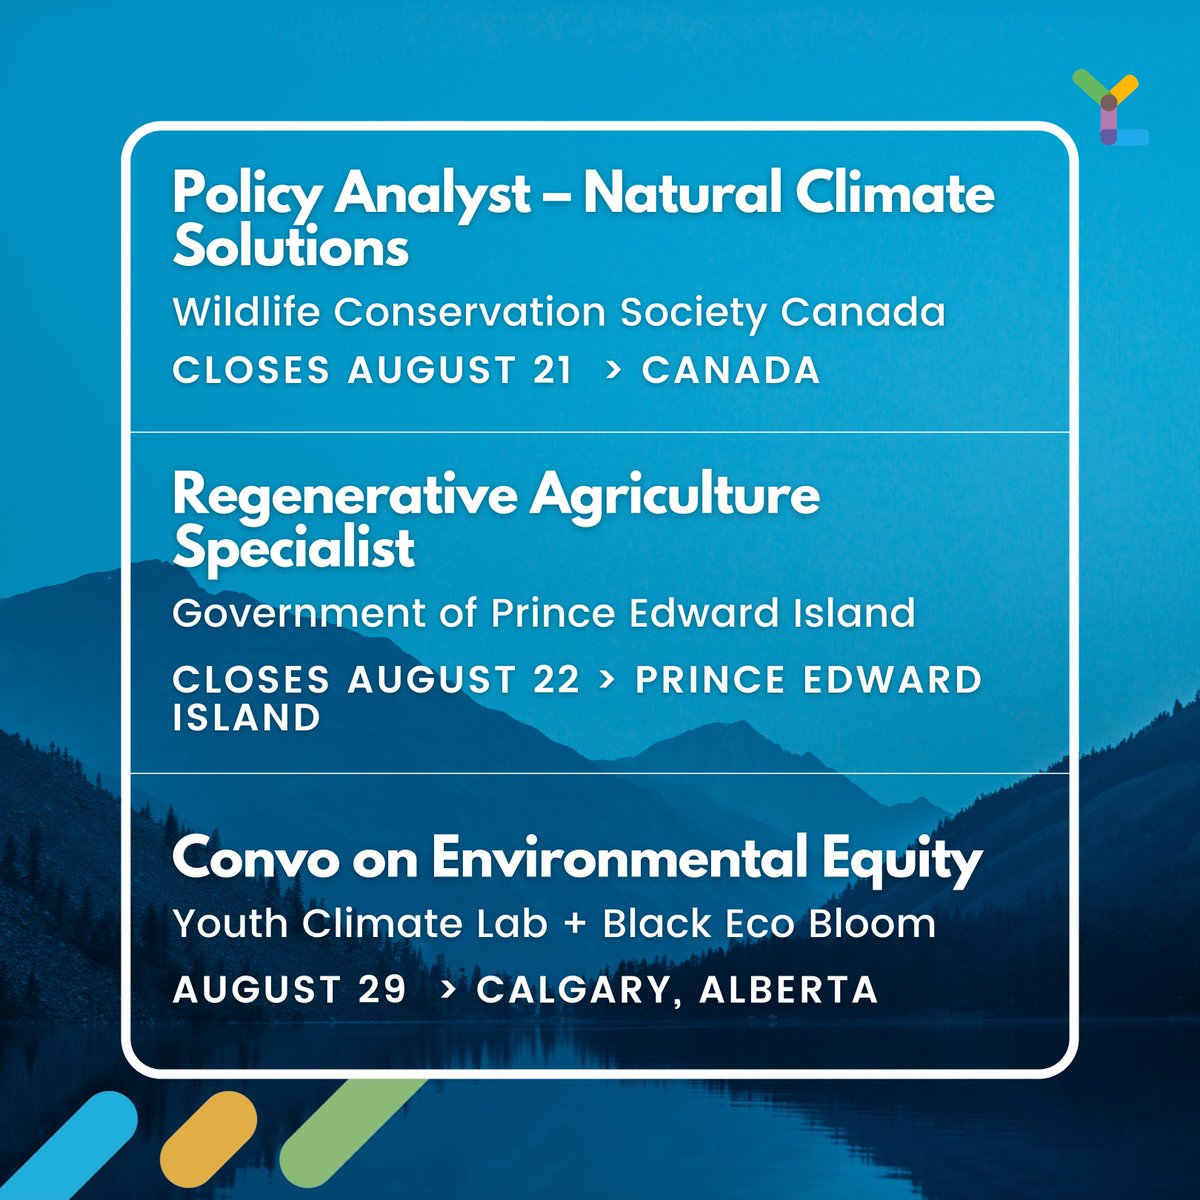 Job opps on our Trello tr.ee/BxhMfafz3j! CAMPAIGNS DIRECTOR @RAVENtrust RESEARCH AND EVALUATIONS LEAD @apathyisboring POLICY ANALYST - NATURAL CLIMATE SOLUTIONS @TheWCS REGENERATIVE AGRICULTURE SPECIALIST @InfoPEI CONVO ON ENVIRO EQUITY YCL & @blackecobloom